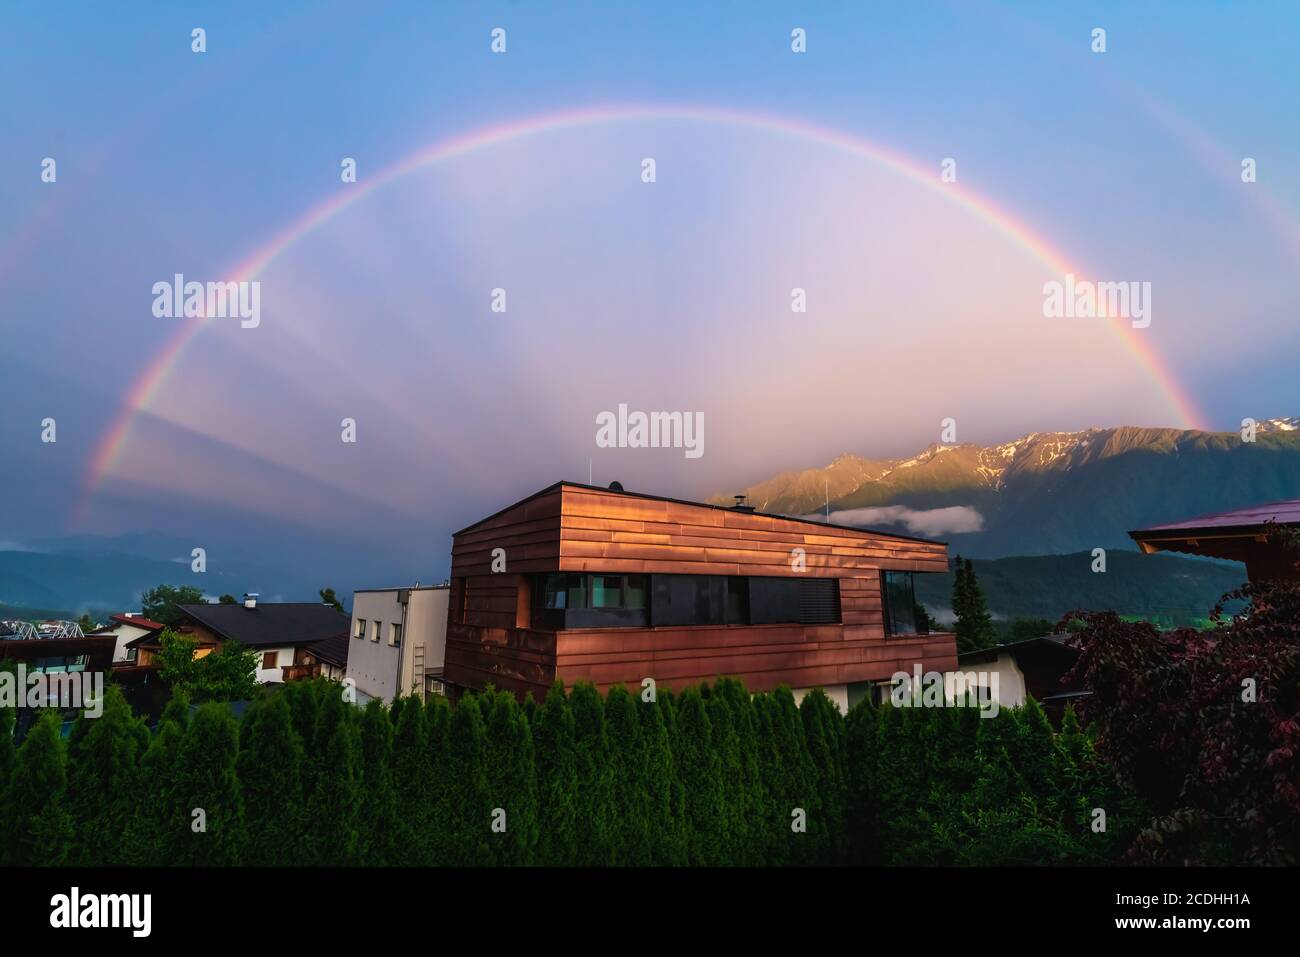 Scenic full Rainbow over modern copper building in Austrian alp mountains village during sunset, Wildermieming, Mieminger Plateau, Tyrol, Austria Stock Photo